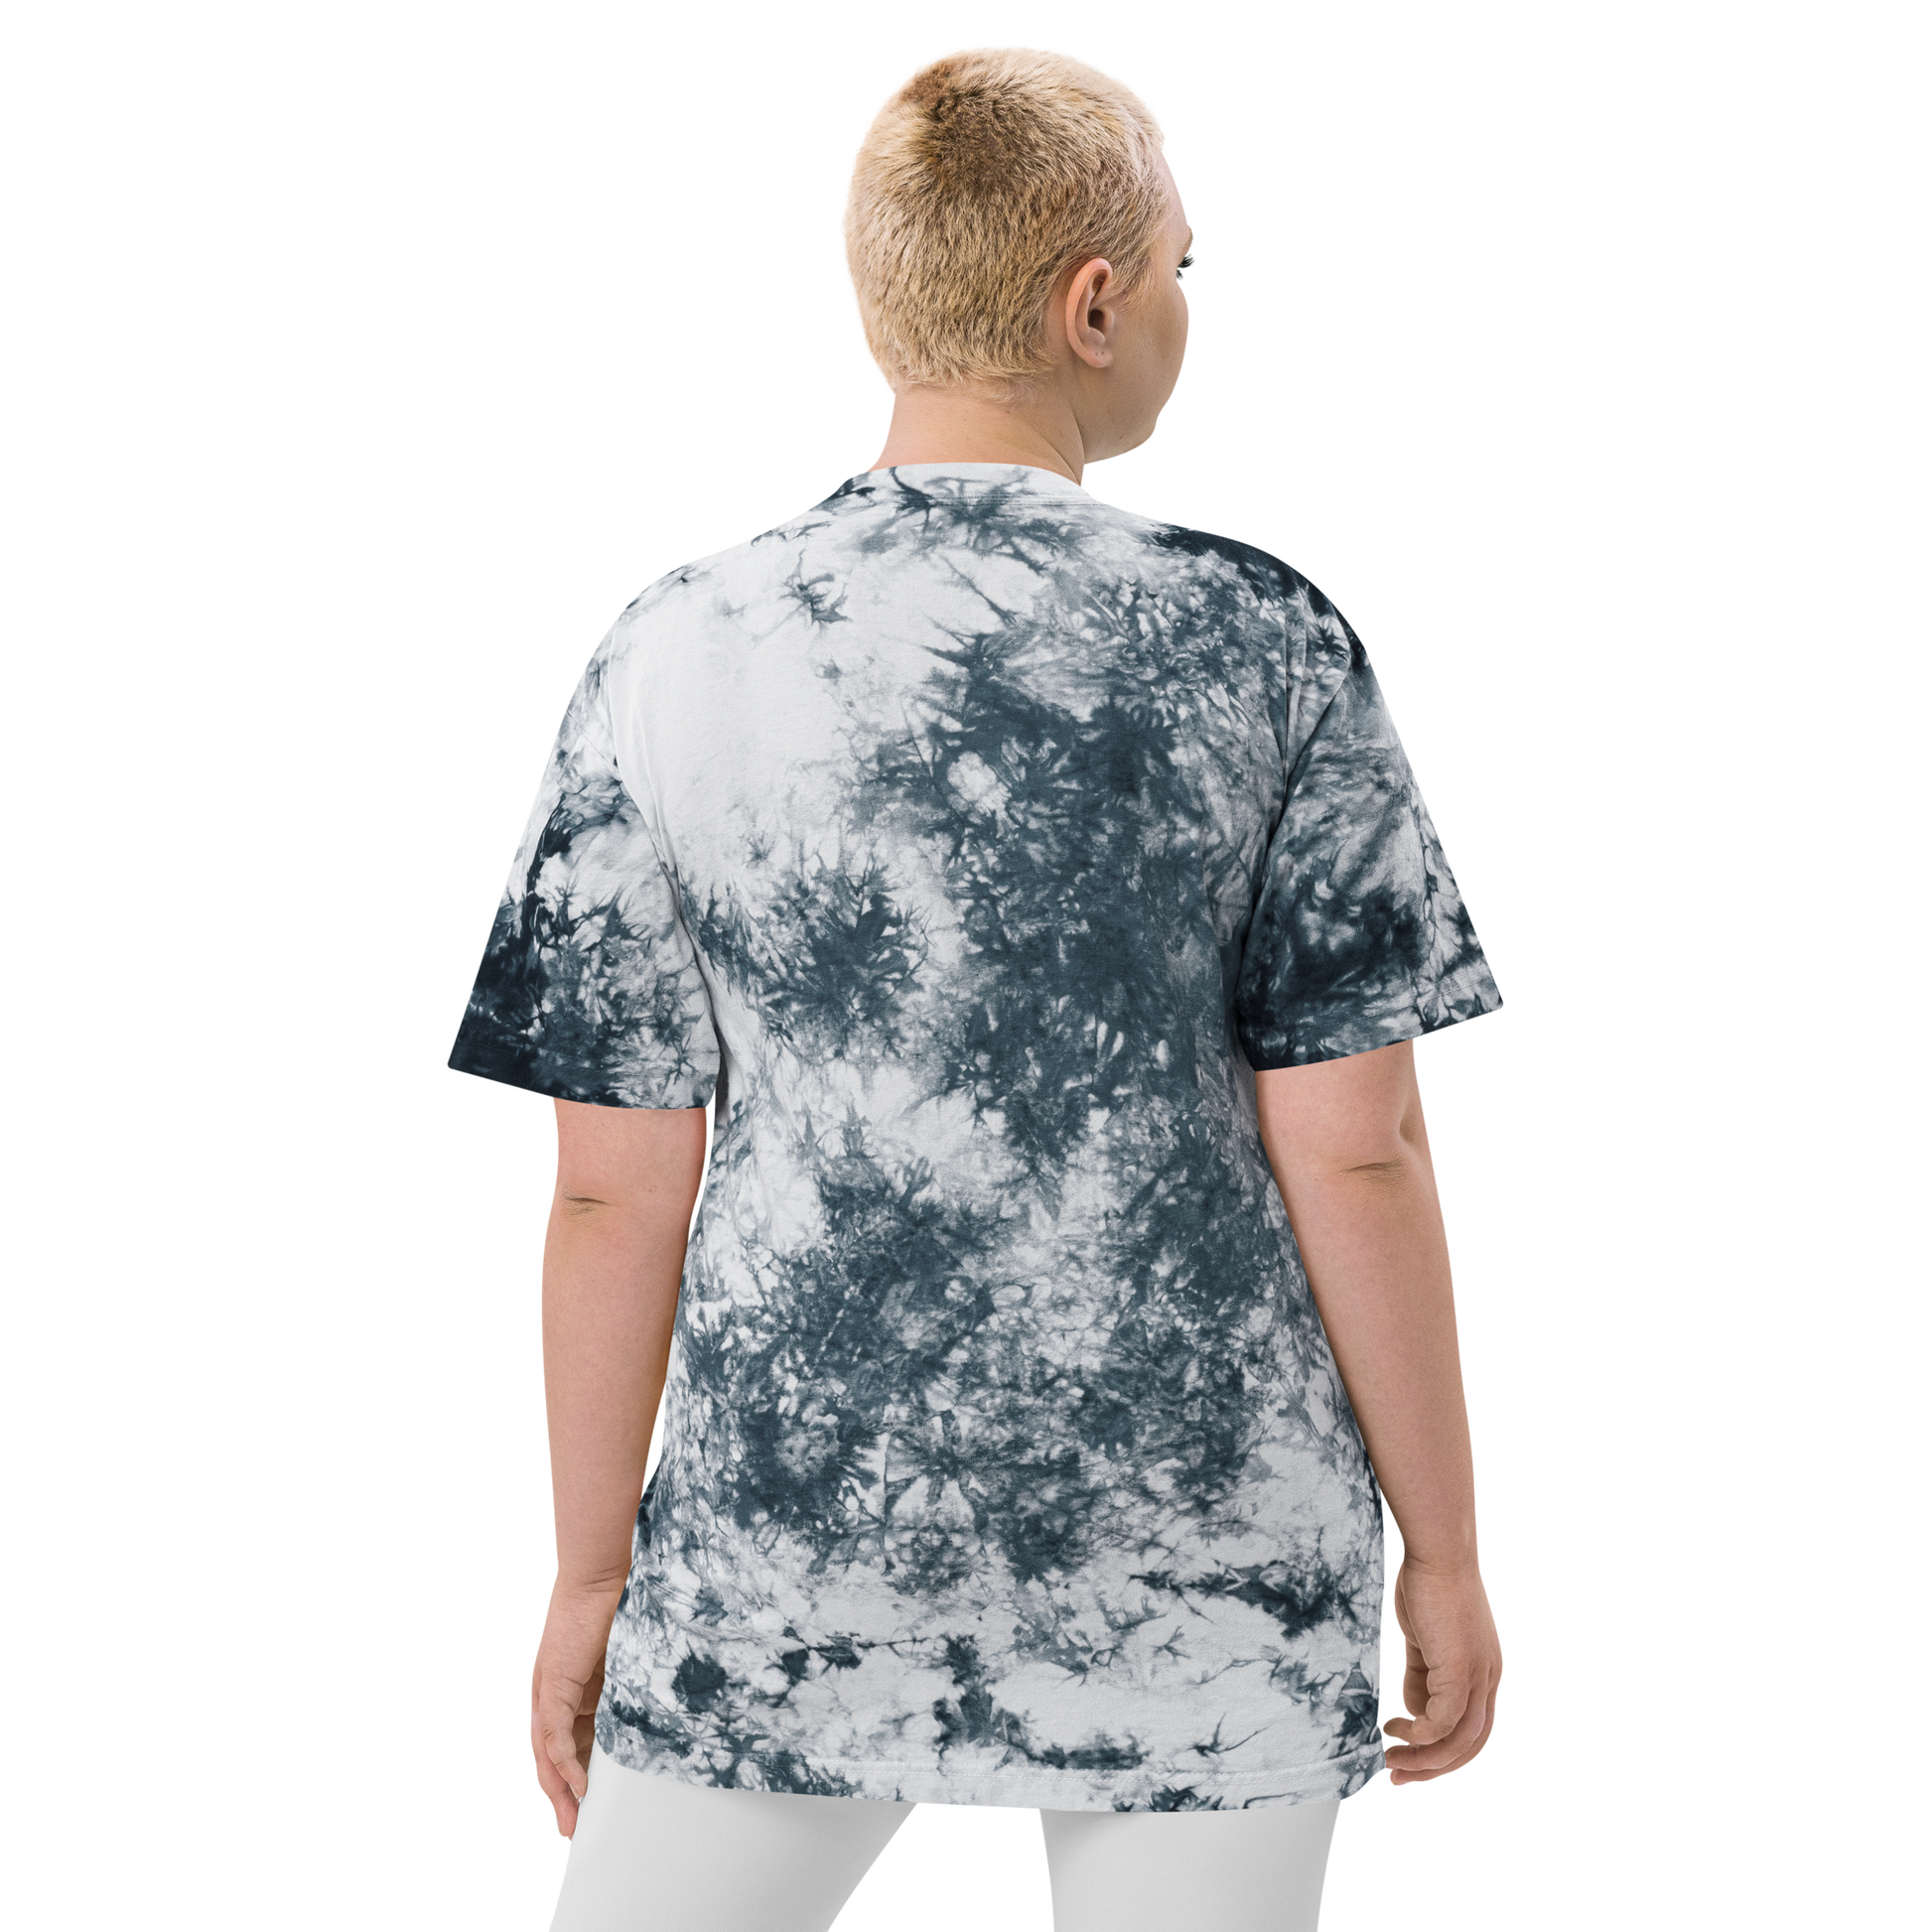 YHM Designs - YYZ Toronto Oversized Tie-Dye T-Shirt - Crossed-X Design with Airport Code and Vintage Propliner - White Embroidery - Image 17